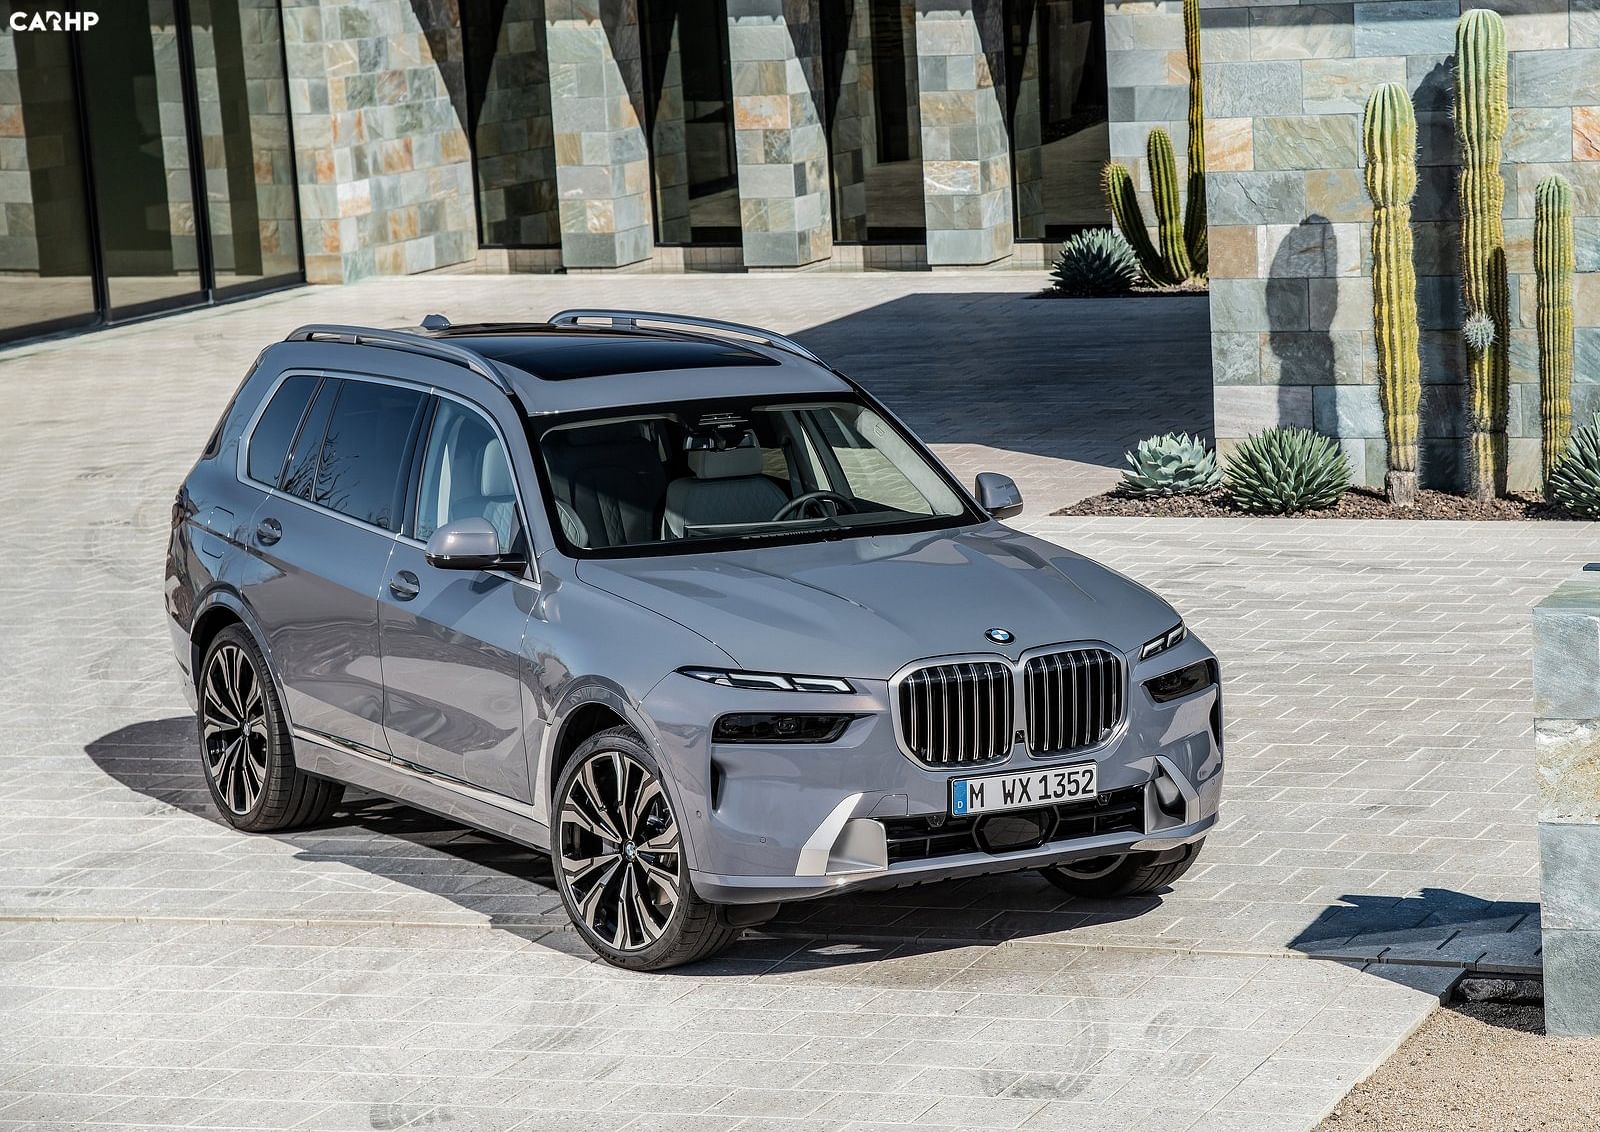 2023 BMW X7 Dimensions, Ground Clearance and Wheelbase | CARHP